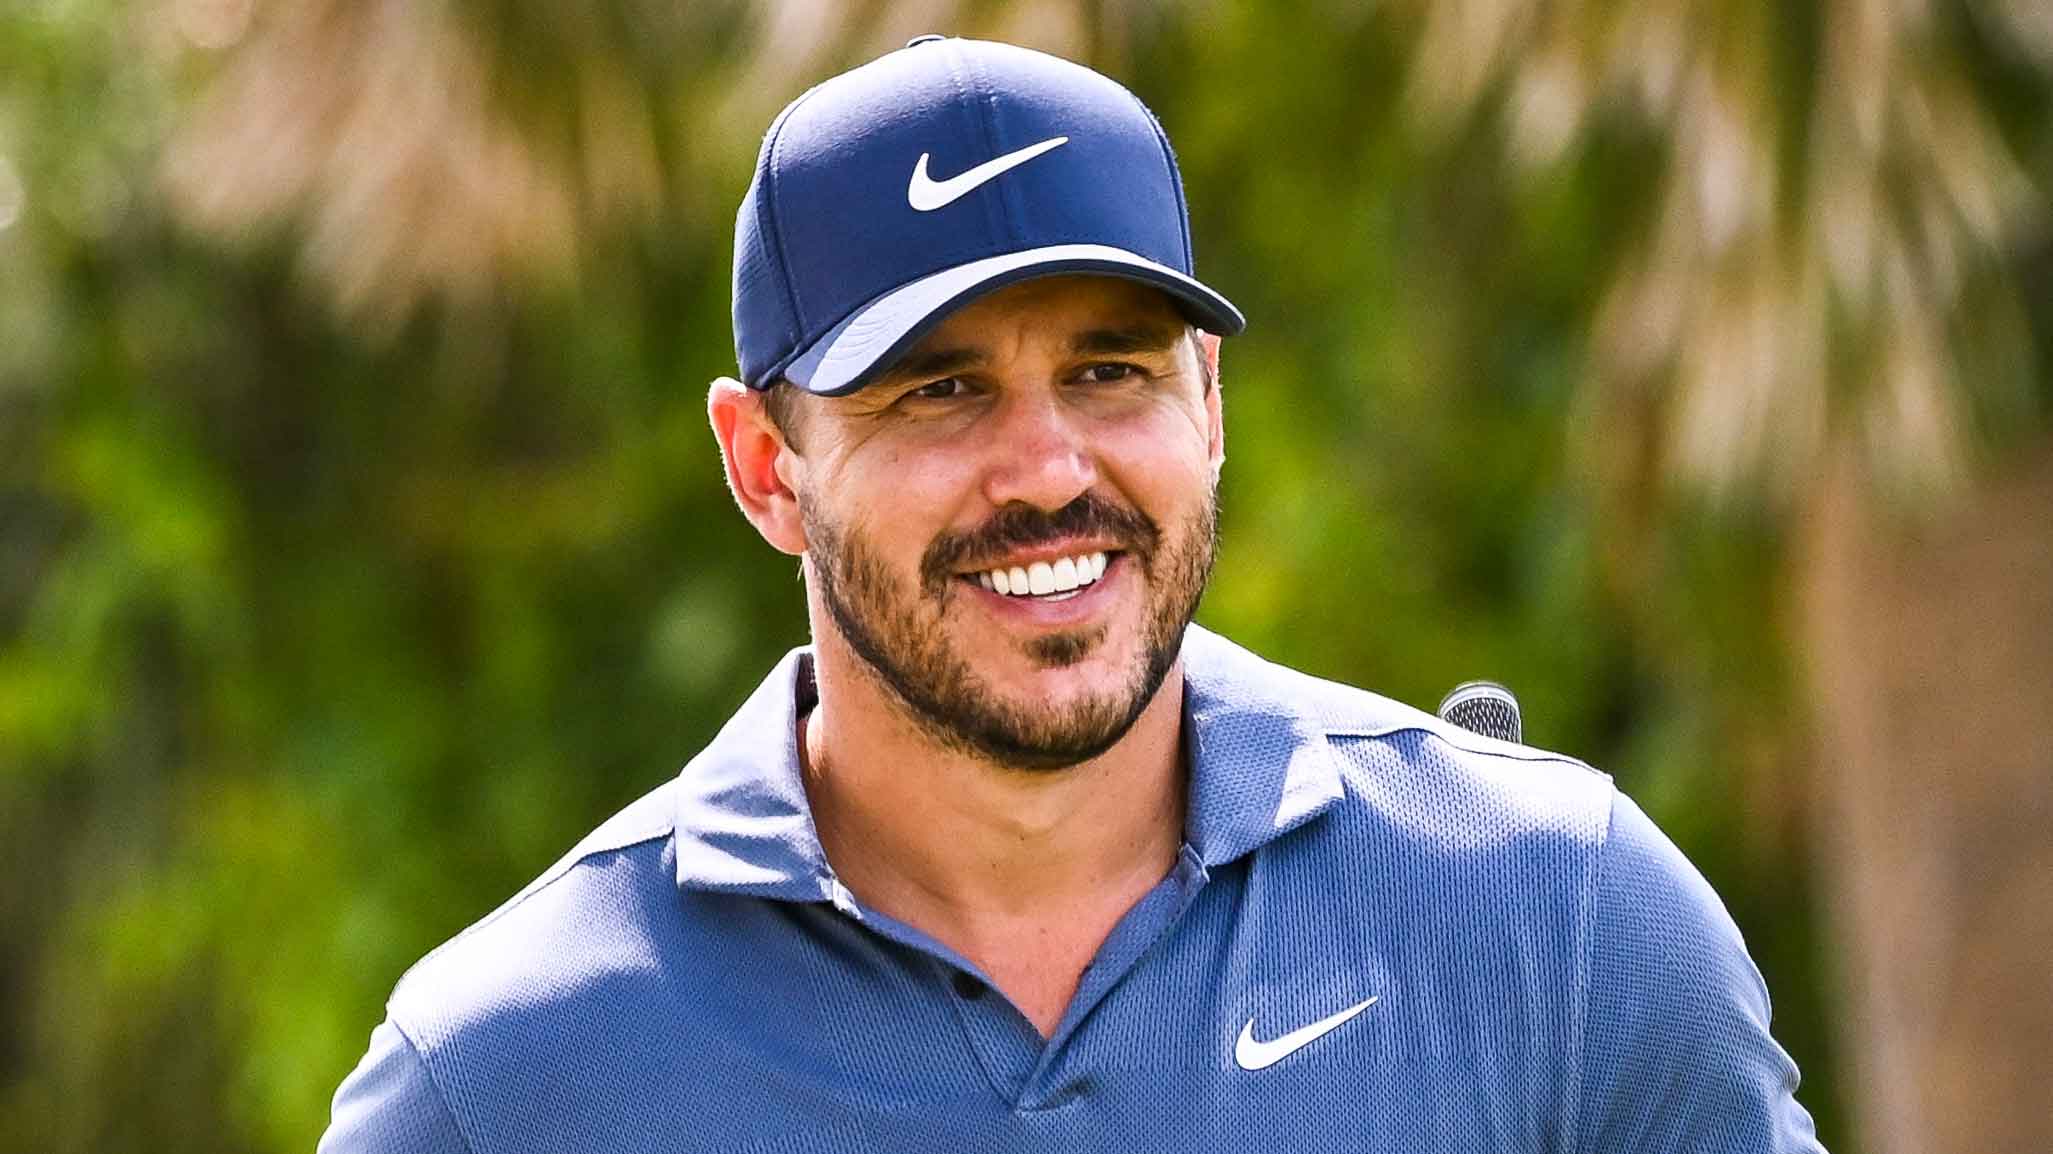 Brooks Koepka Has a Cheeky Response to Rory McIlroy’s Change of Tune on LIV